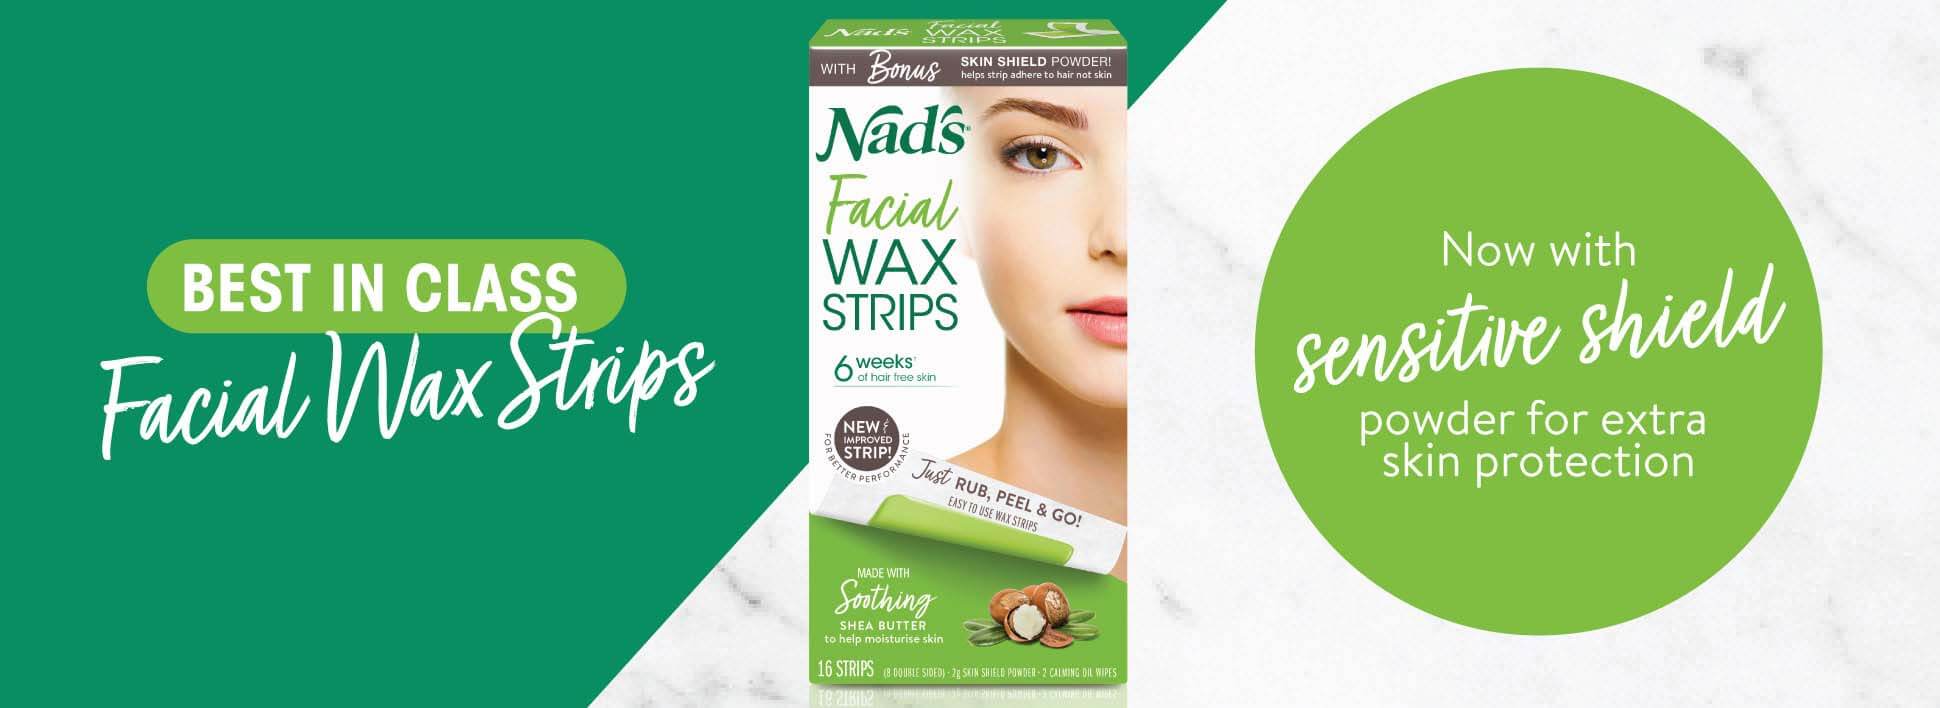 Nads Hair Removal Facial Wax Strips | Buy Now